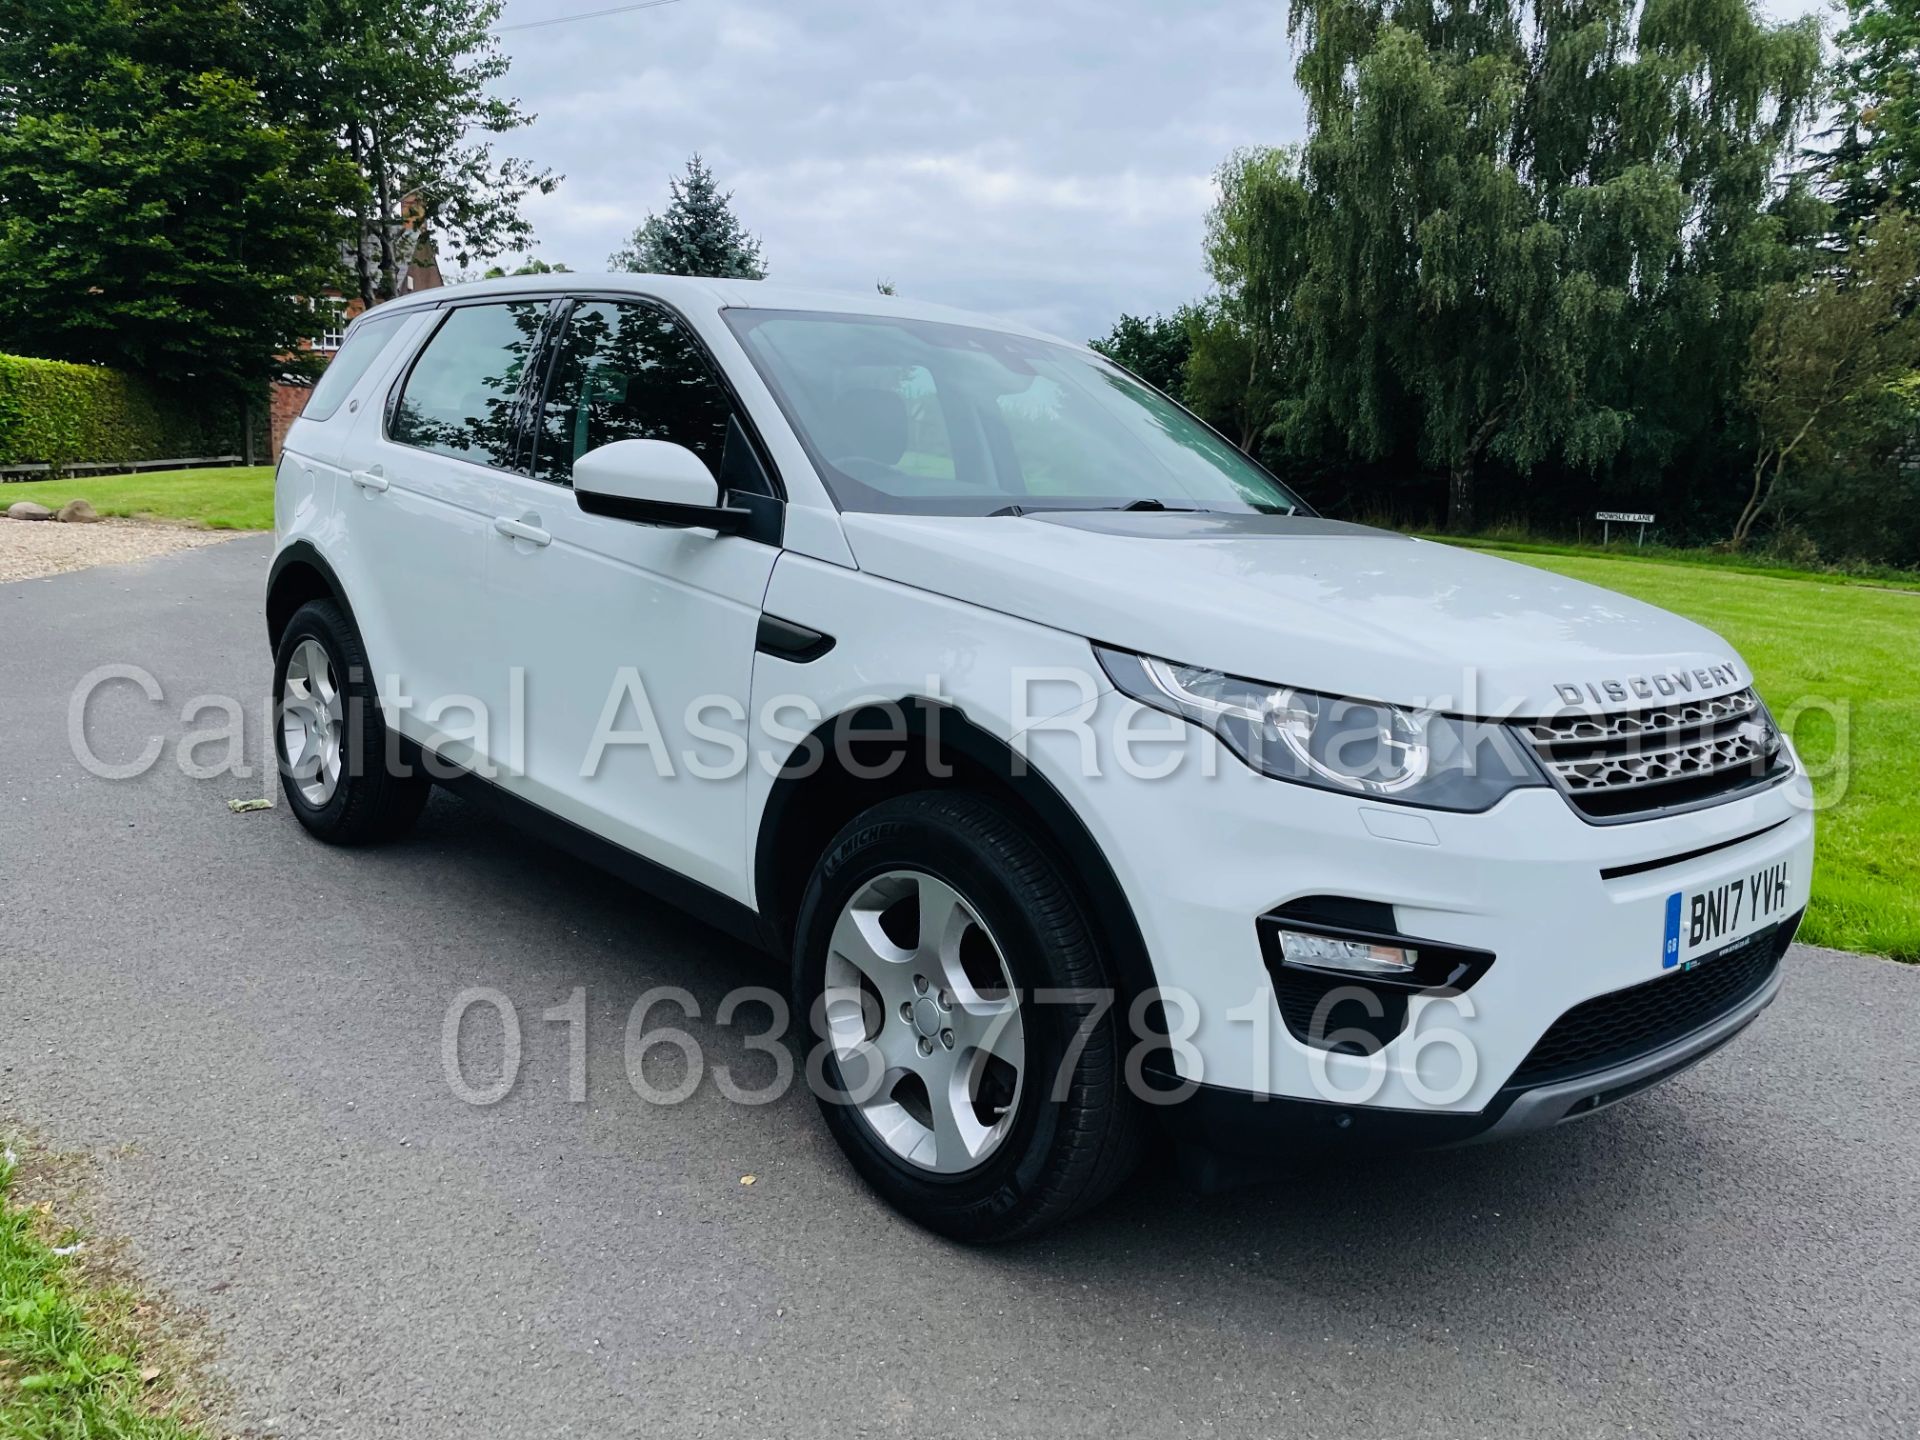 (On Sale) LAND ROVER DISCOVERY SPORT *SE TECH* SUV (2017 -EURO 6) '2.0 TD4 - STOP/START' (1 OWNER) - Image 3 of 52